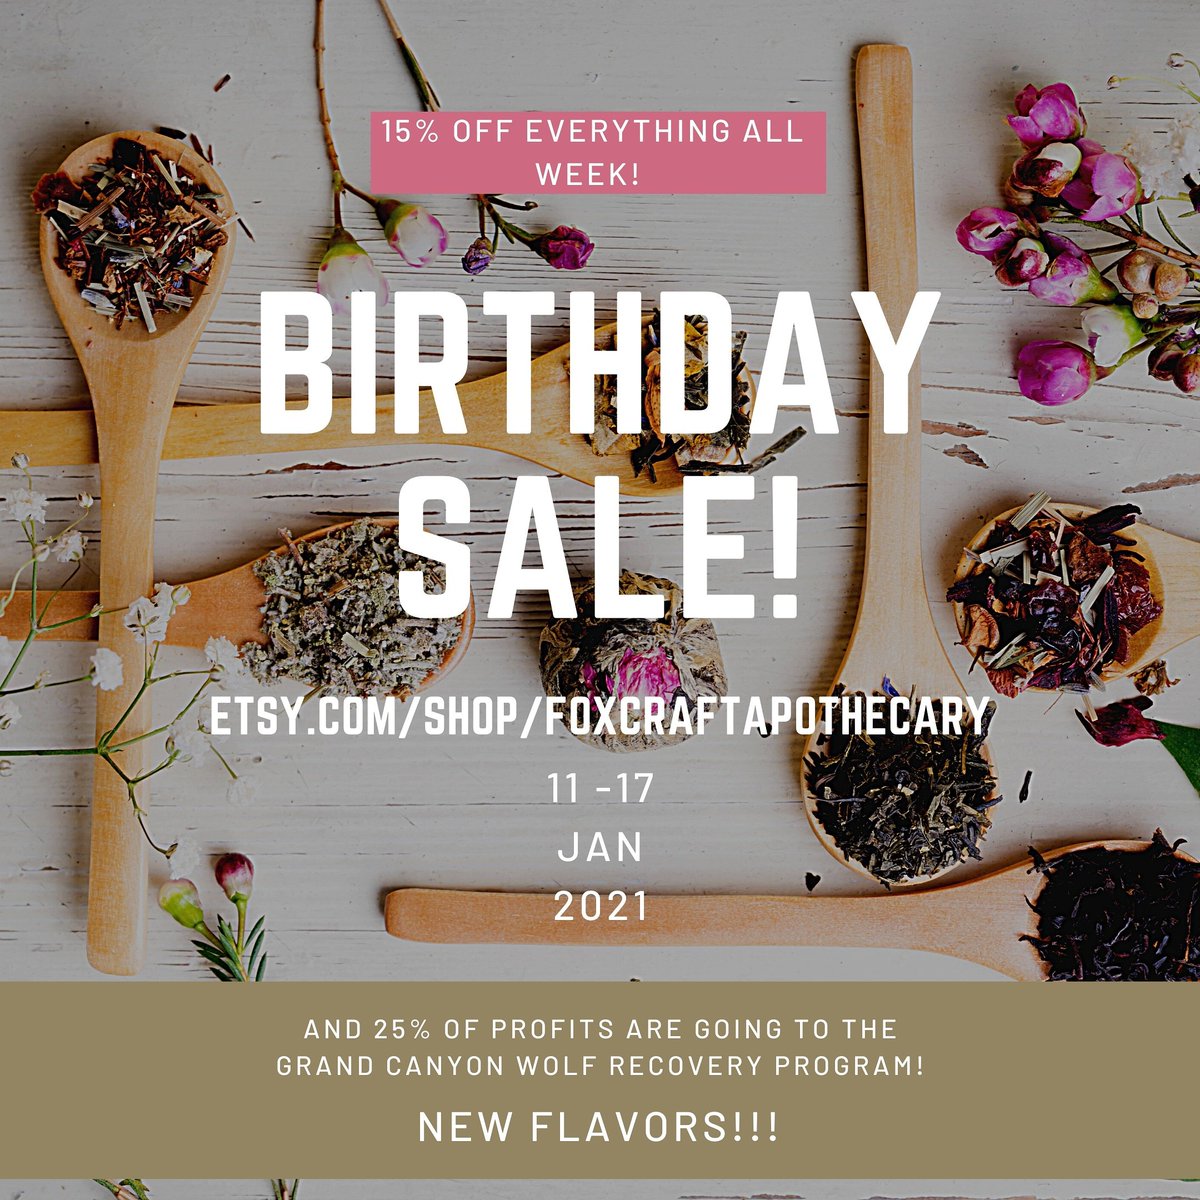 Birthday sale! All teas and autographed books are 15% off AND 25% of profits goes to Grand Canyon Wolf Recover Project! Please check it out and RT!
Etsy.com/shop/foxcrafta…

#books #booksale #teasale #tea #tealover #etsy #RT #promotion